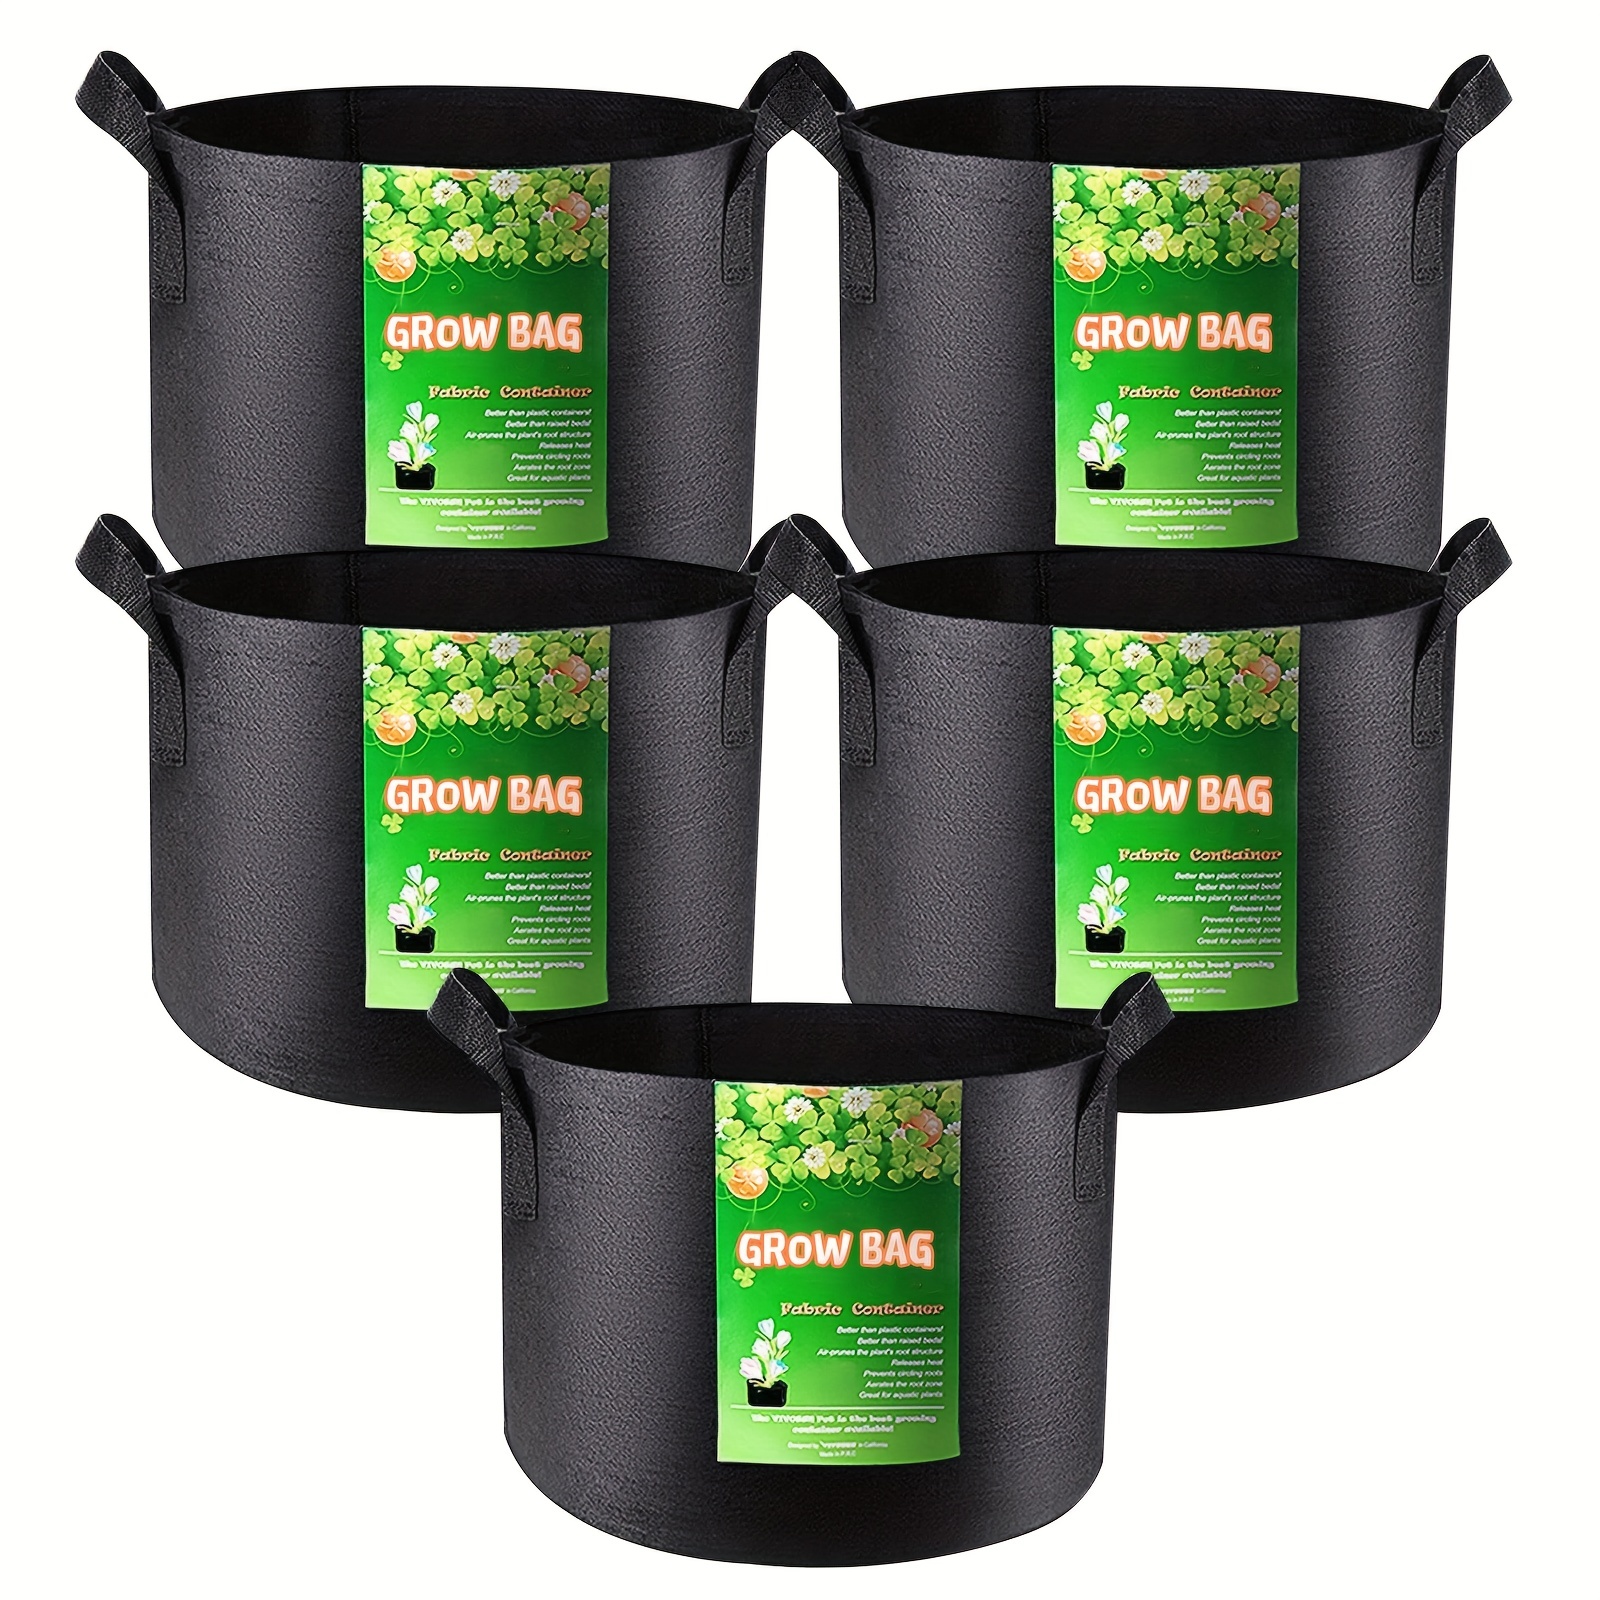 T4U Fabric Plant Grow Bags with Handle 7 Gallon Pack of 5, Heavy